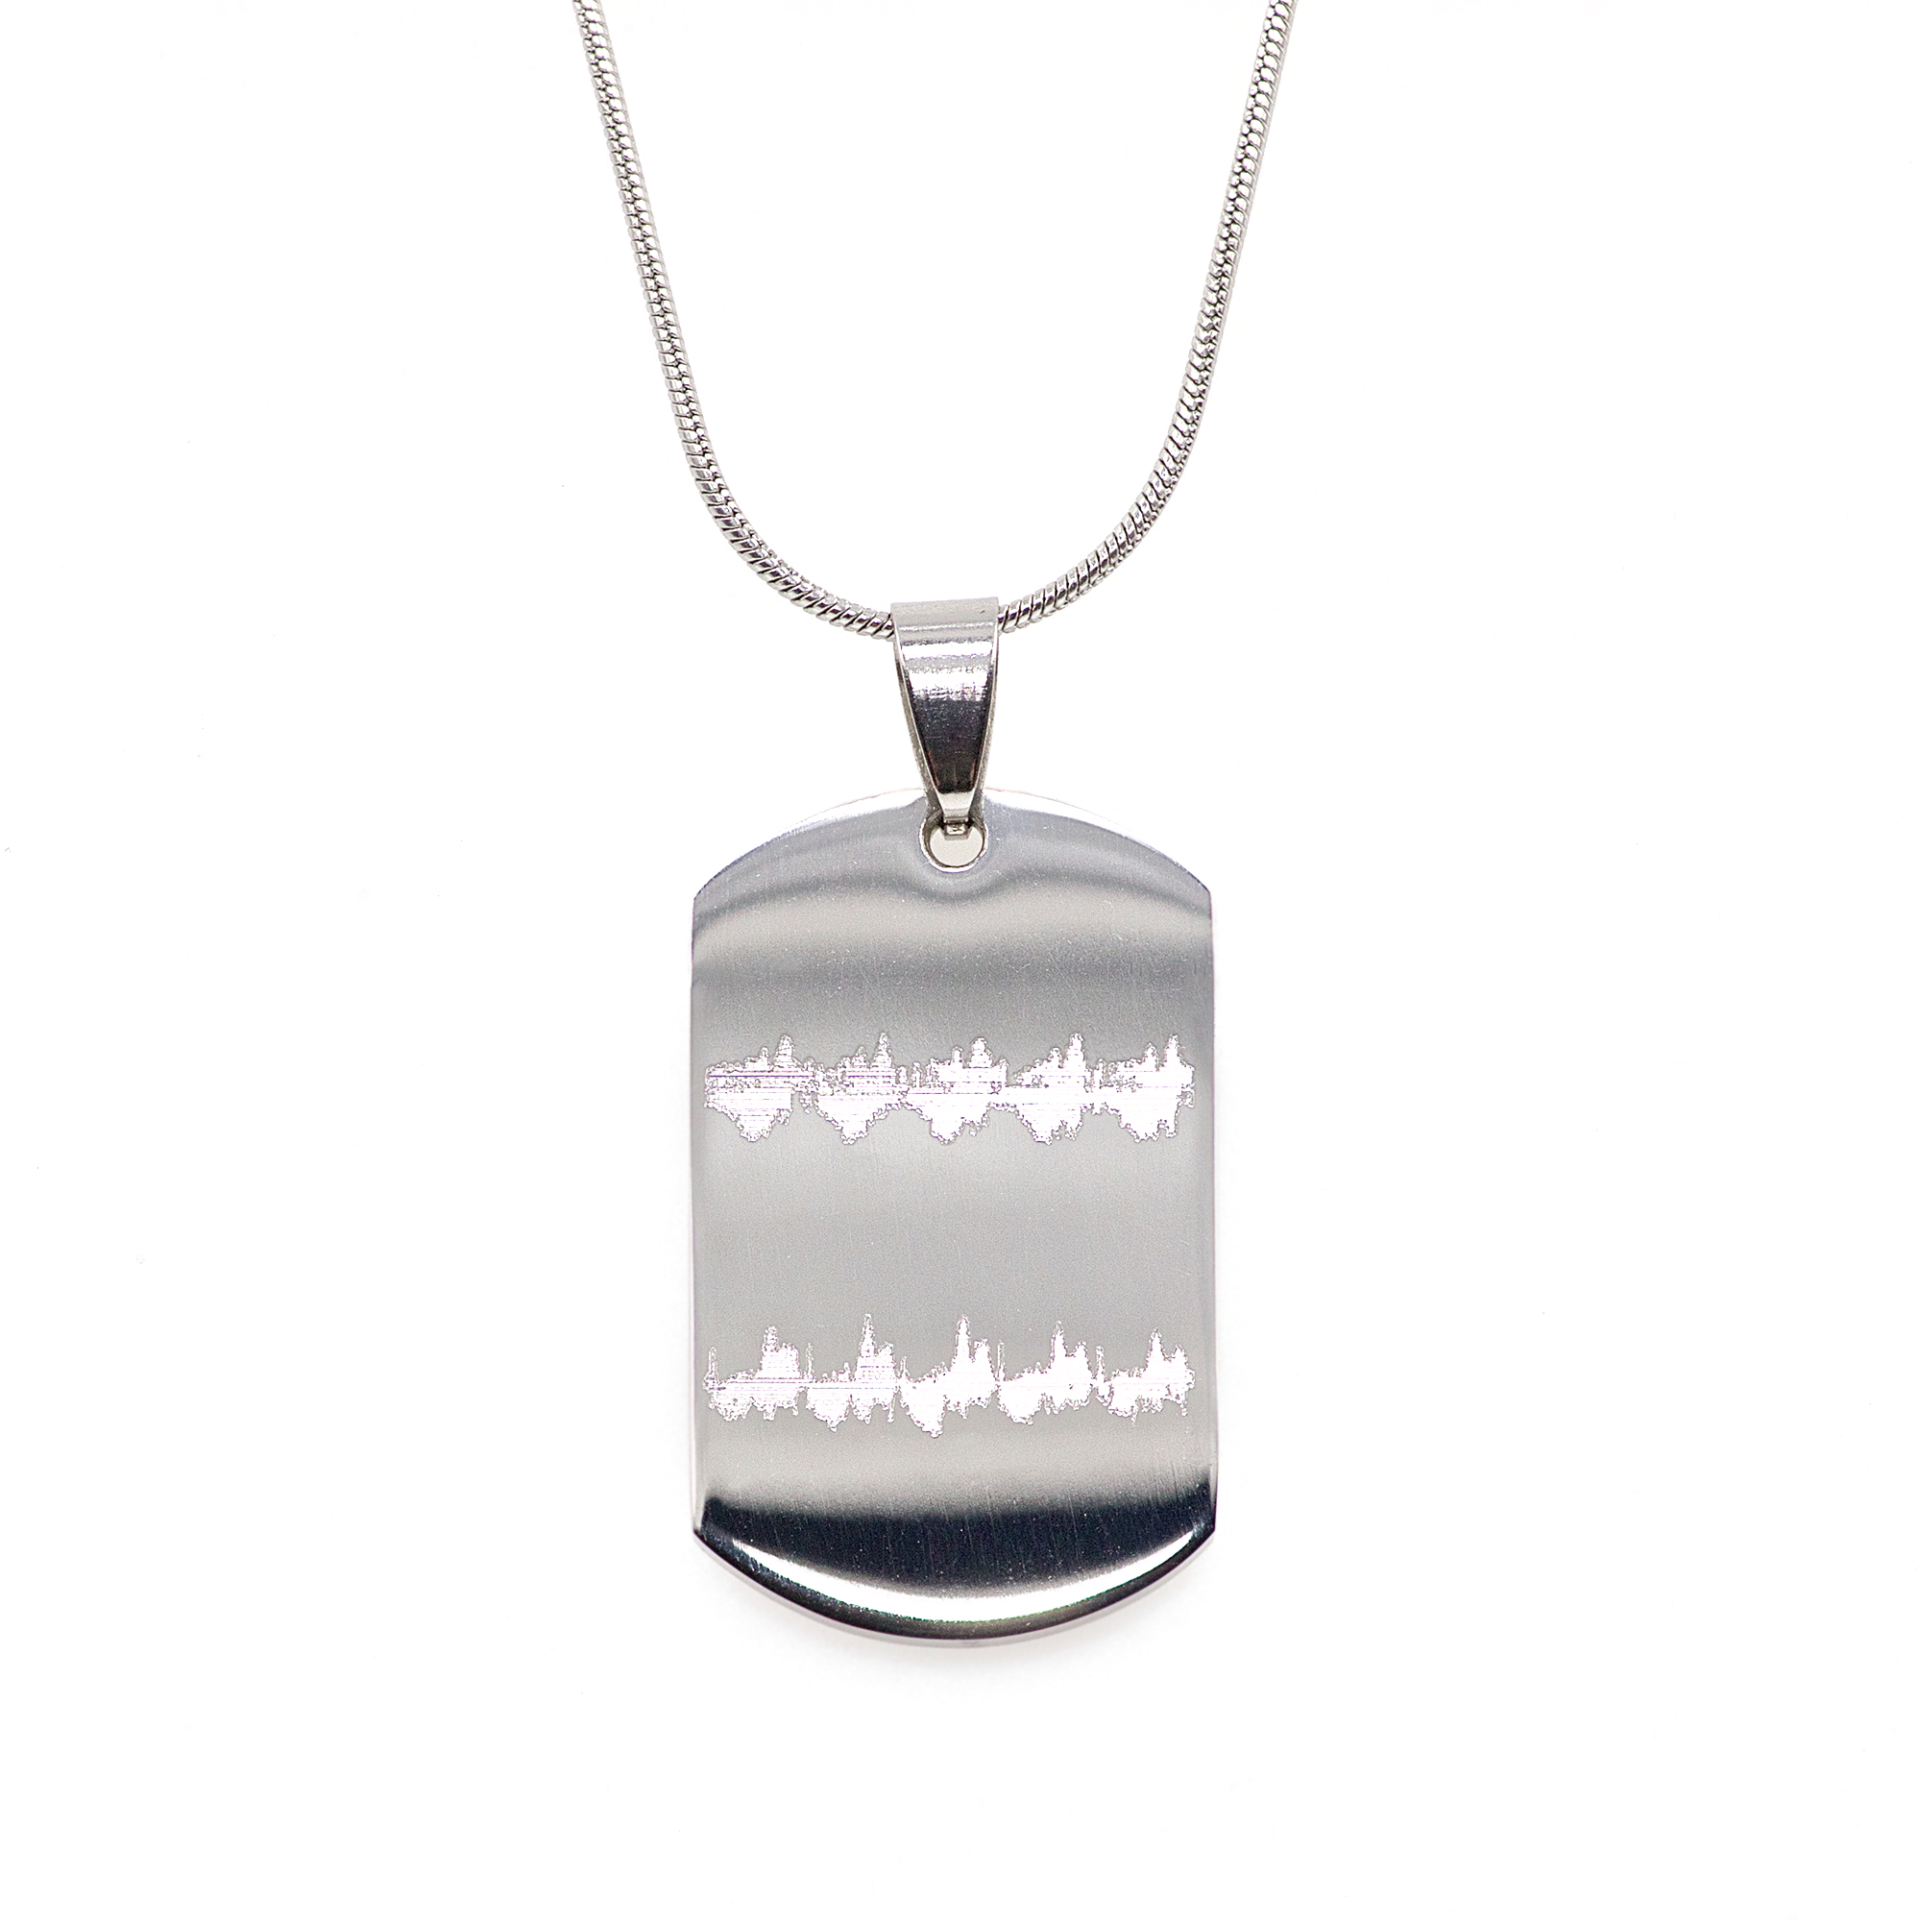 Mini Heartbeat Dog Tag Necklace Using 2 Different Ultrasound Heartbeat Waveforms in Stainless Steel